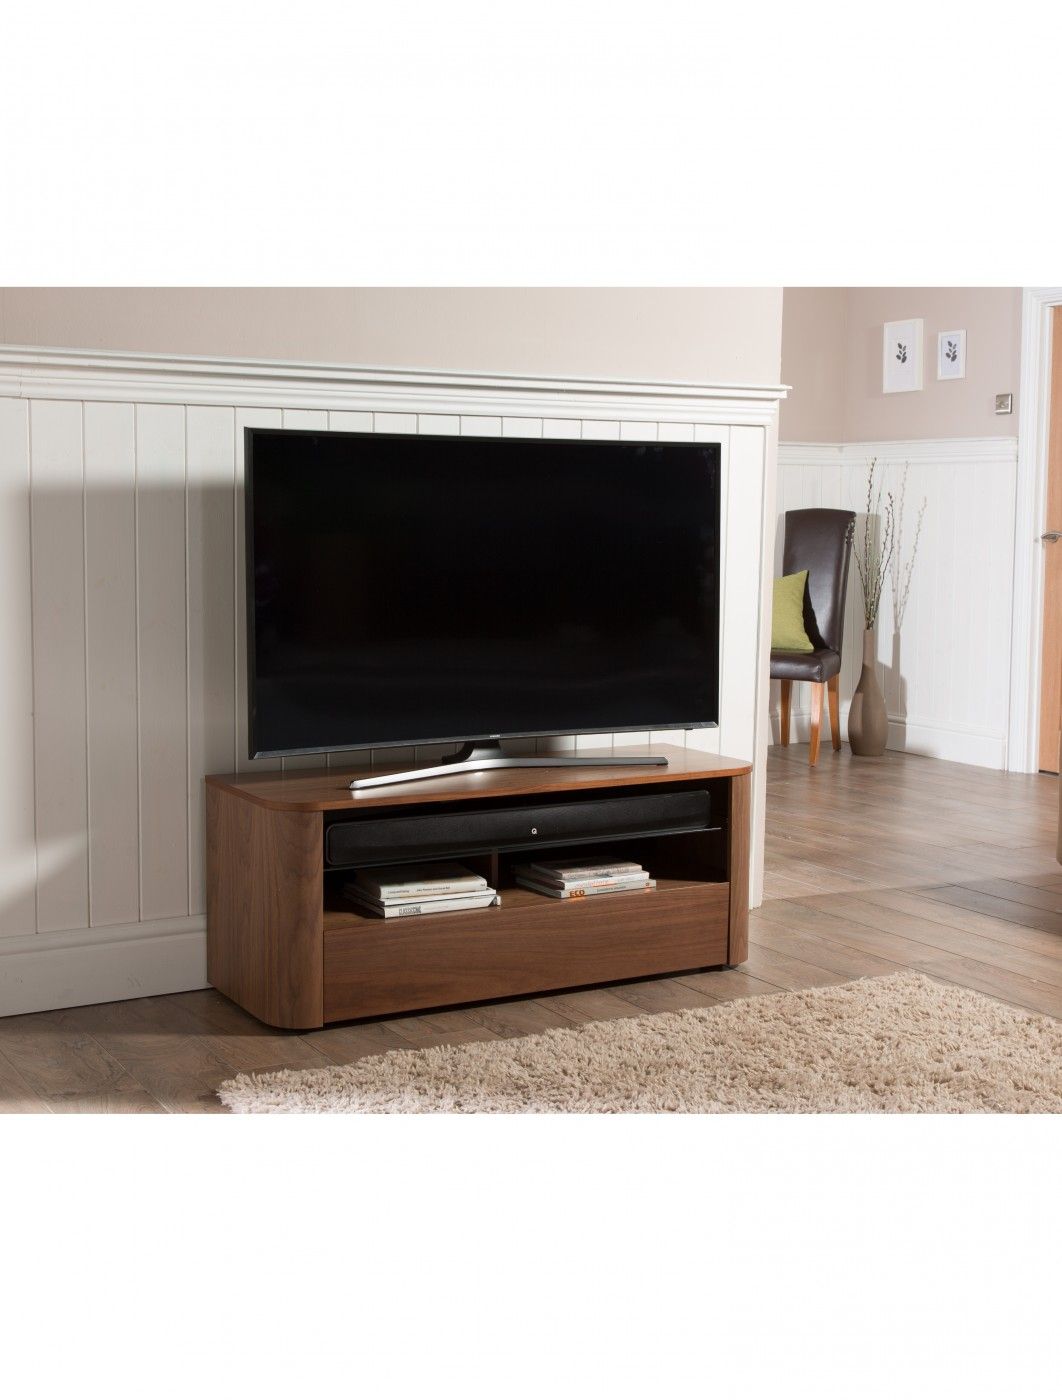 Alphason Hugo Tv Stand Adh1260 Wal Walnut | 121 Tv Mounts Intended For Alphason Tv Cabinet (View 6 of 15)